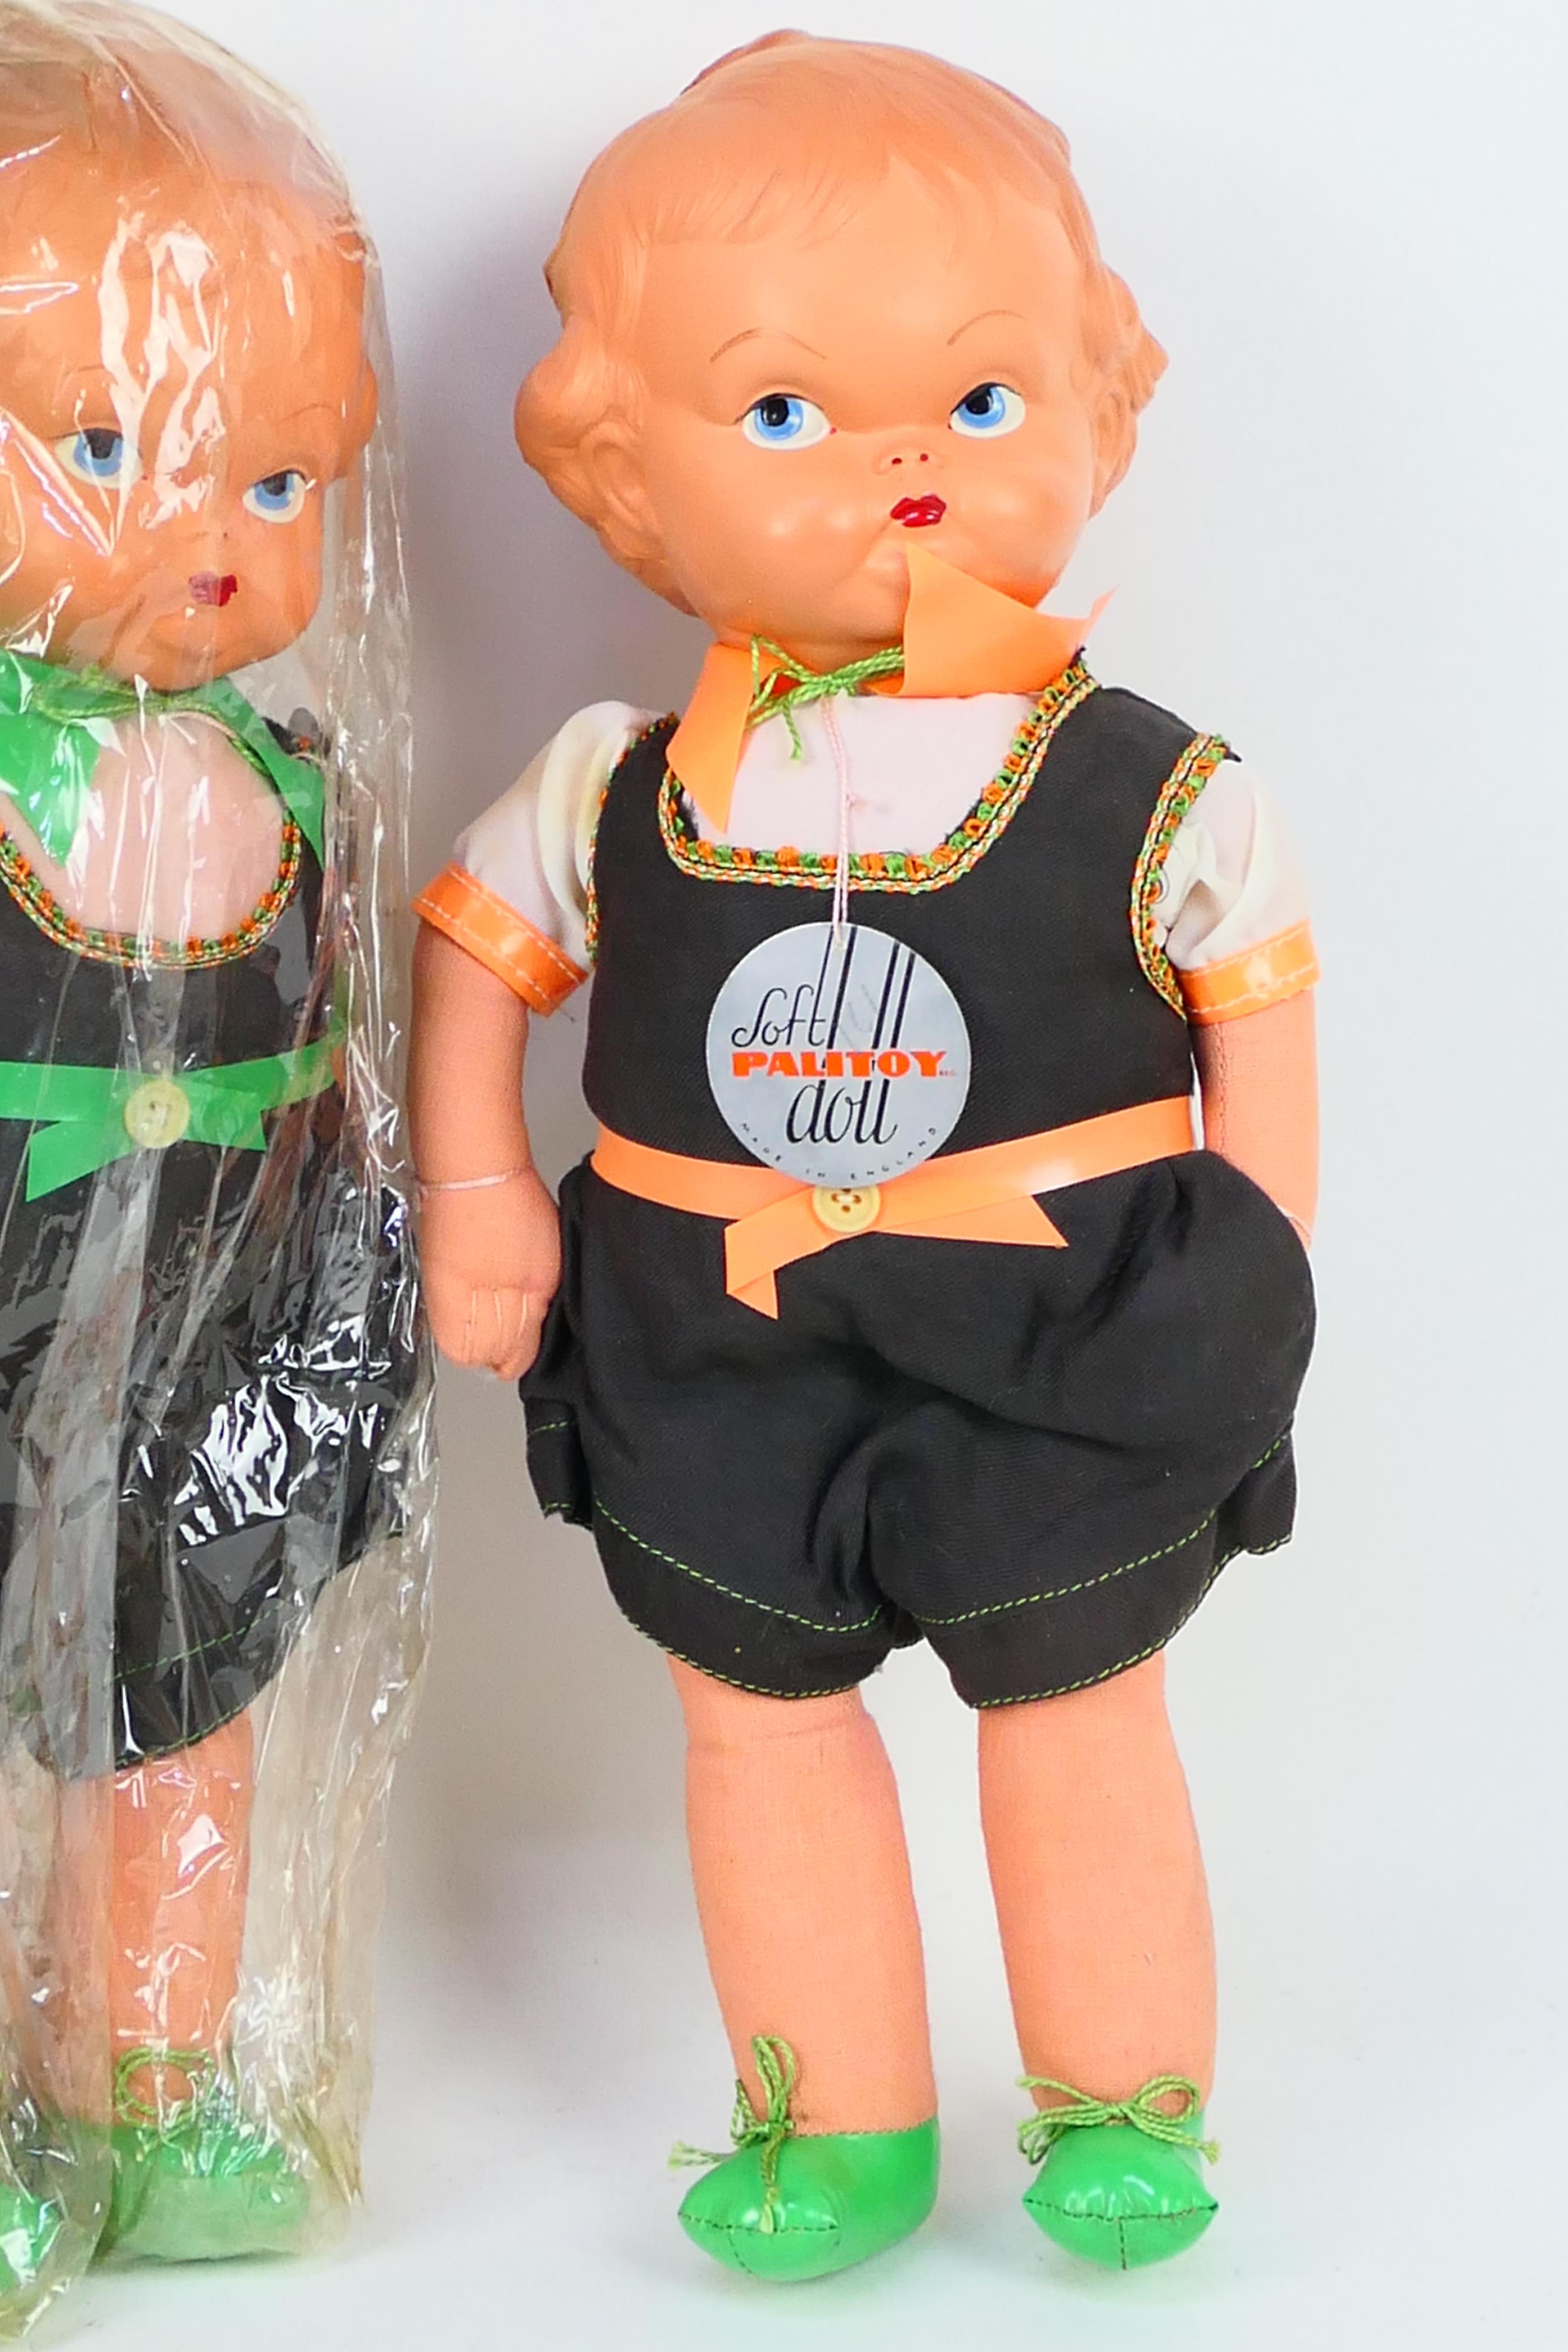 Palitoy - Four bagged Palitoy Soft Dolls. Lot consists of two 14" boy dolls and two 14" girl dolls. - Image 3 of 4